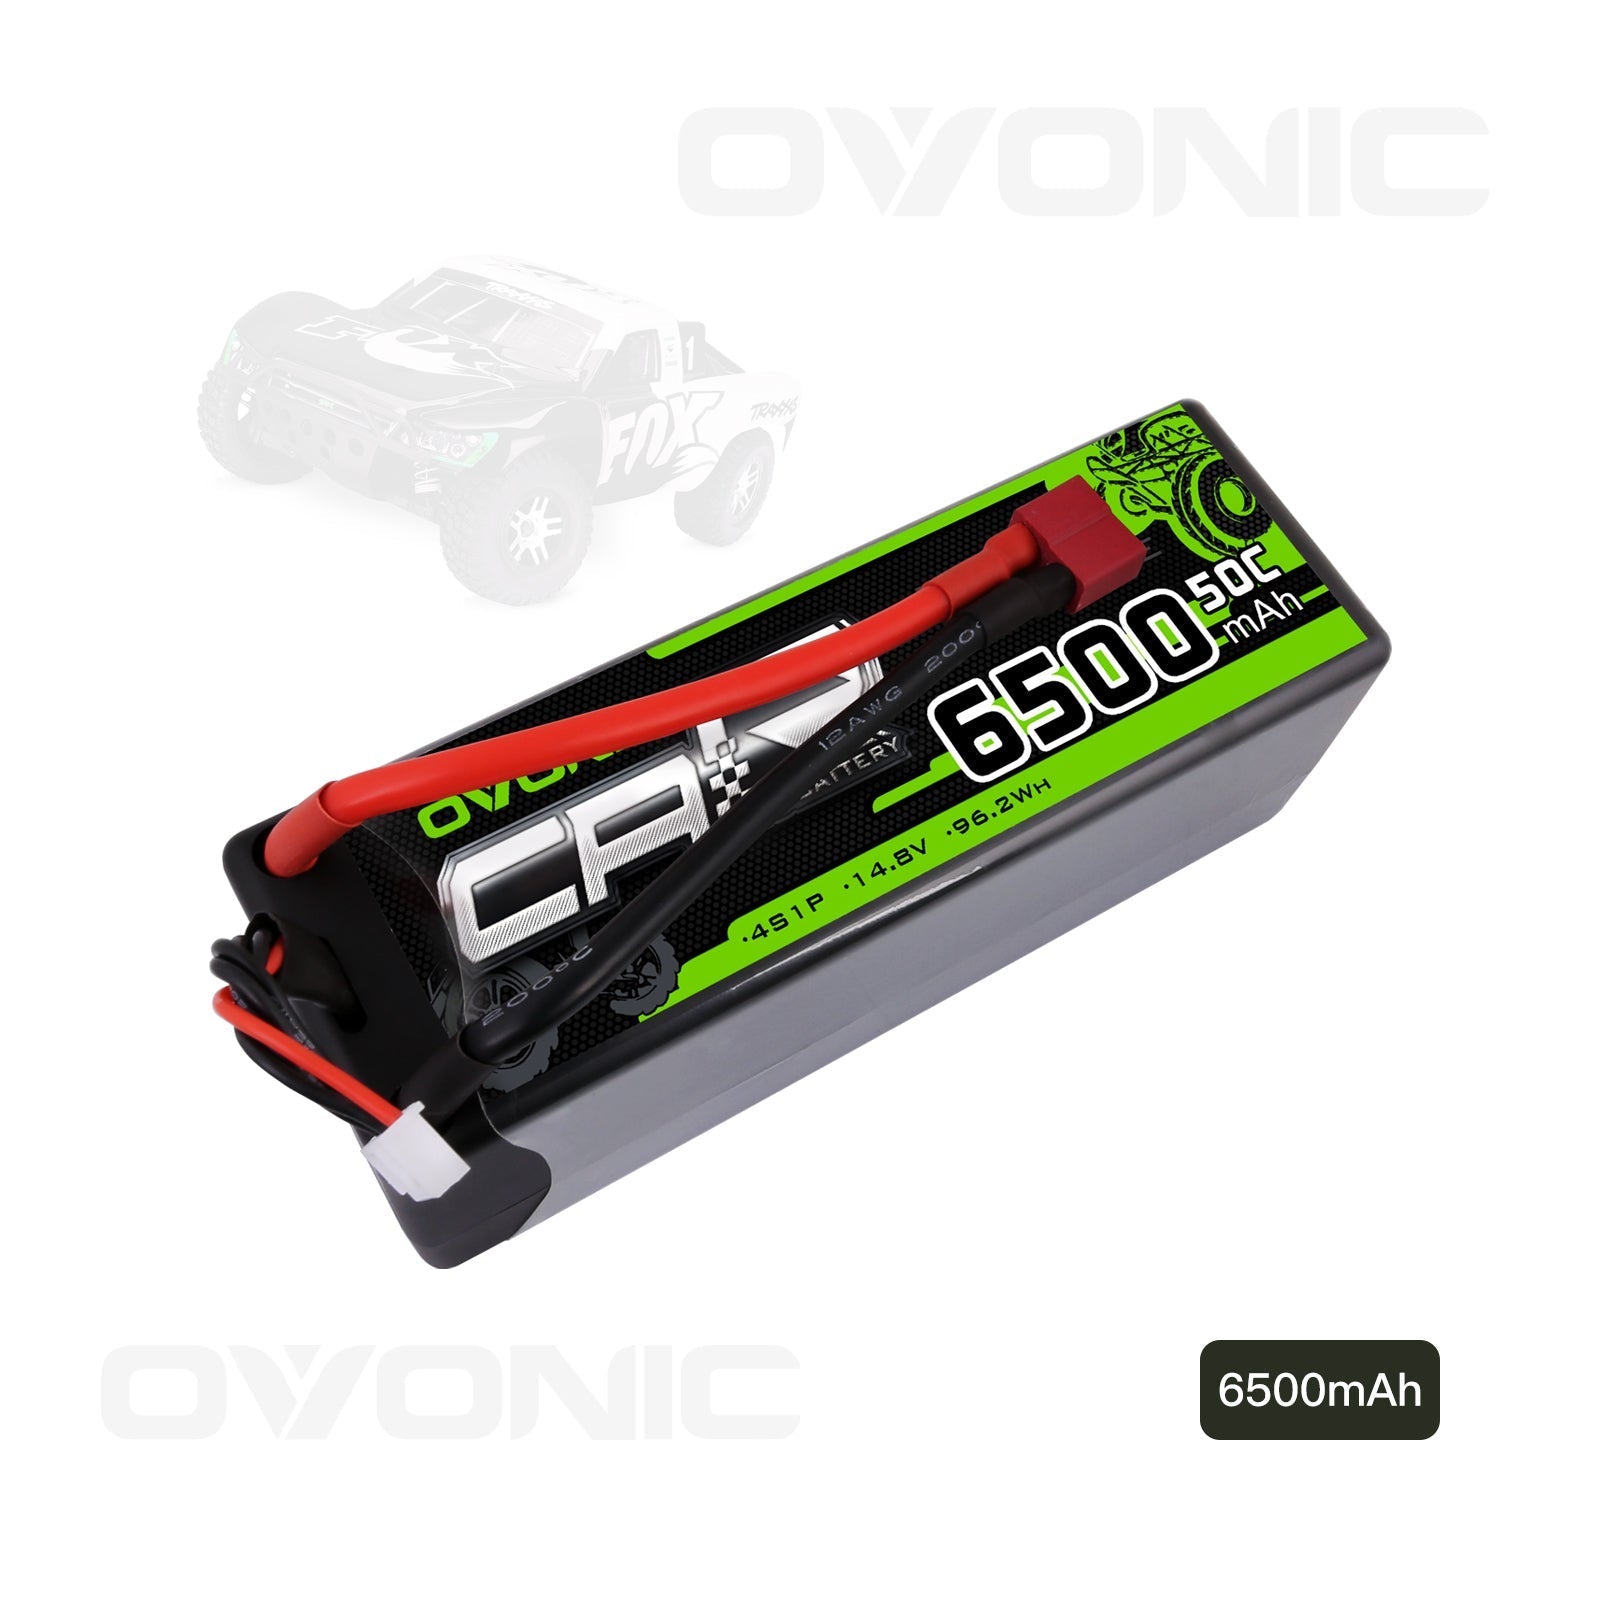 OVONIC Hardcase 14.8V 50C 6500 mAh 4S LiPo Battery Pack 14# with Deans Plug - Ampow